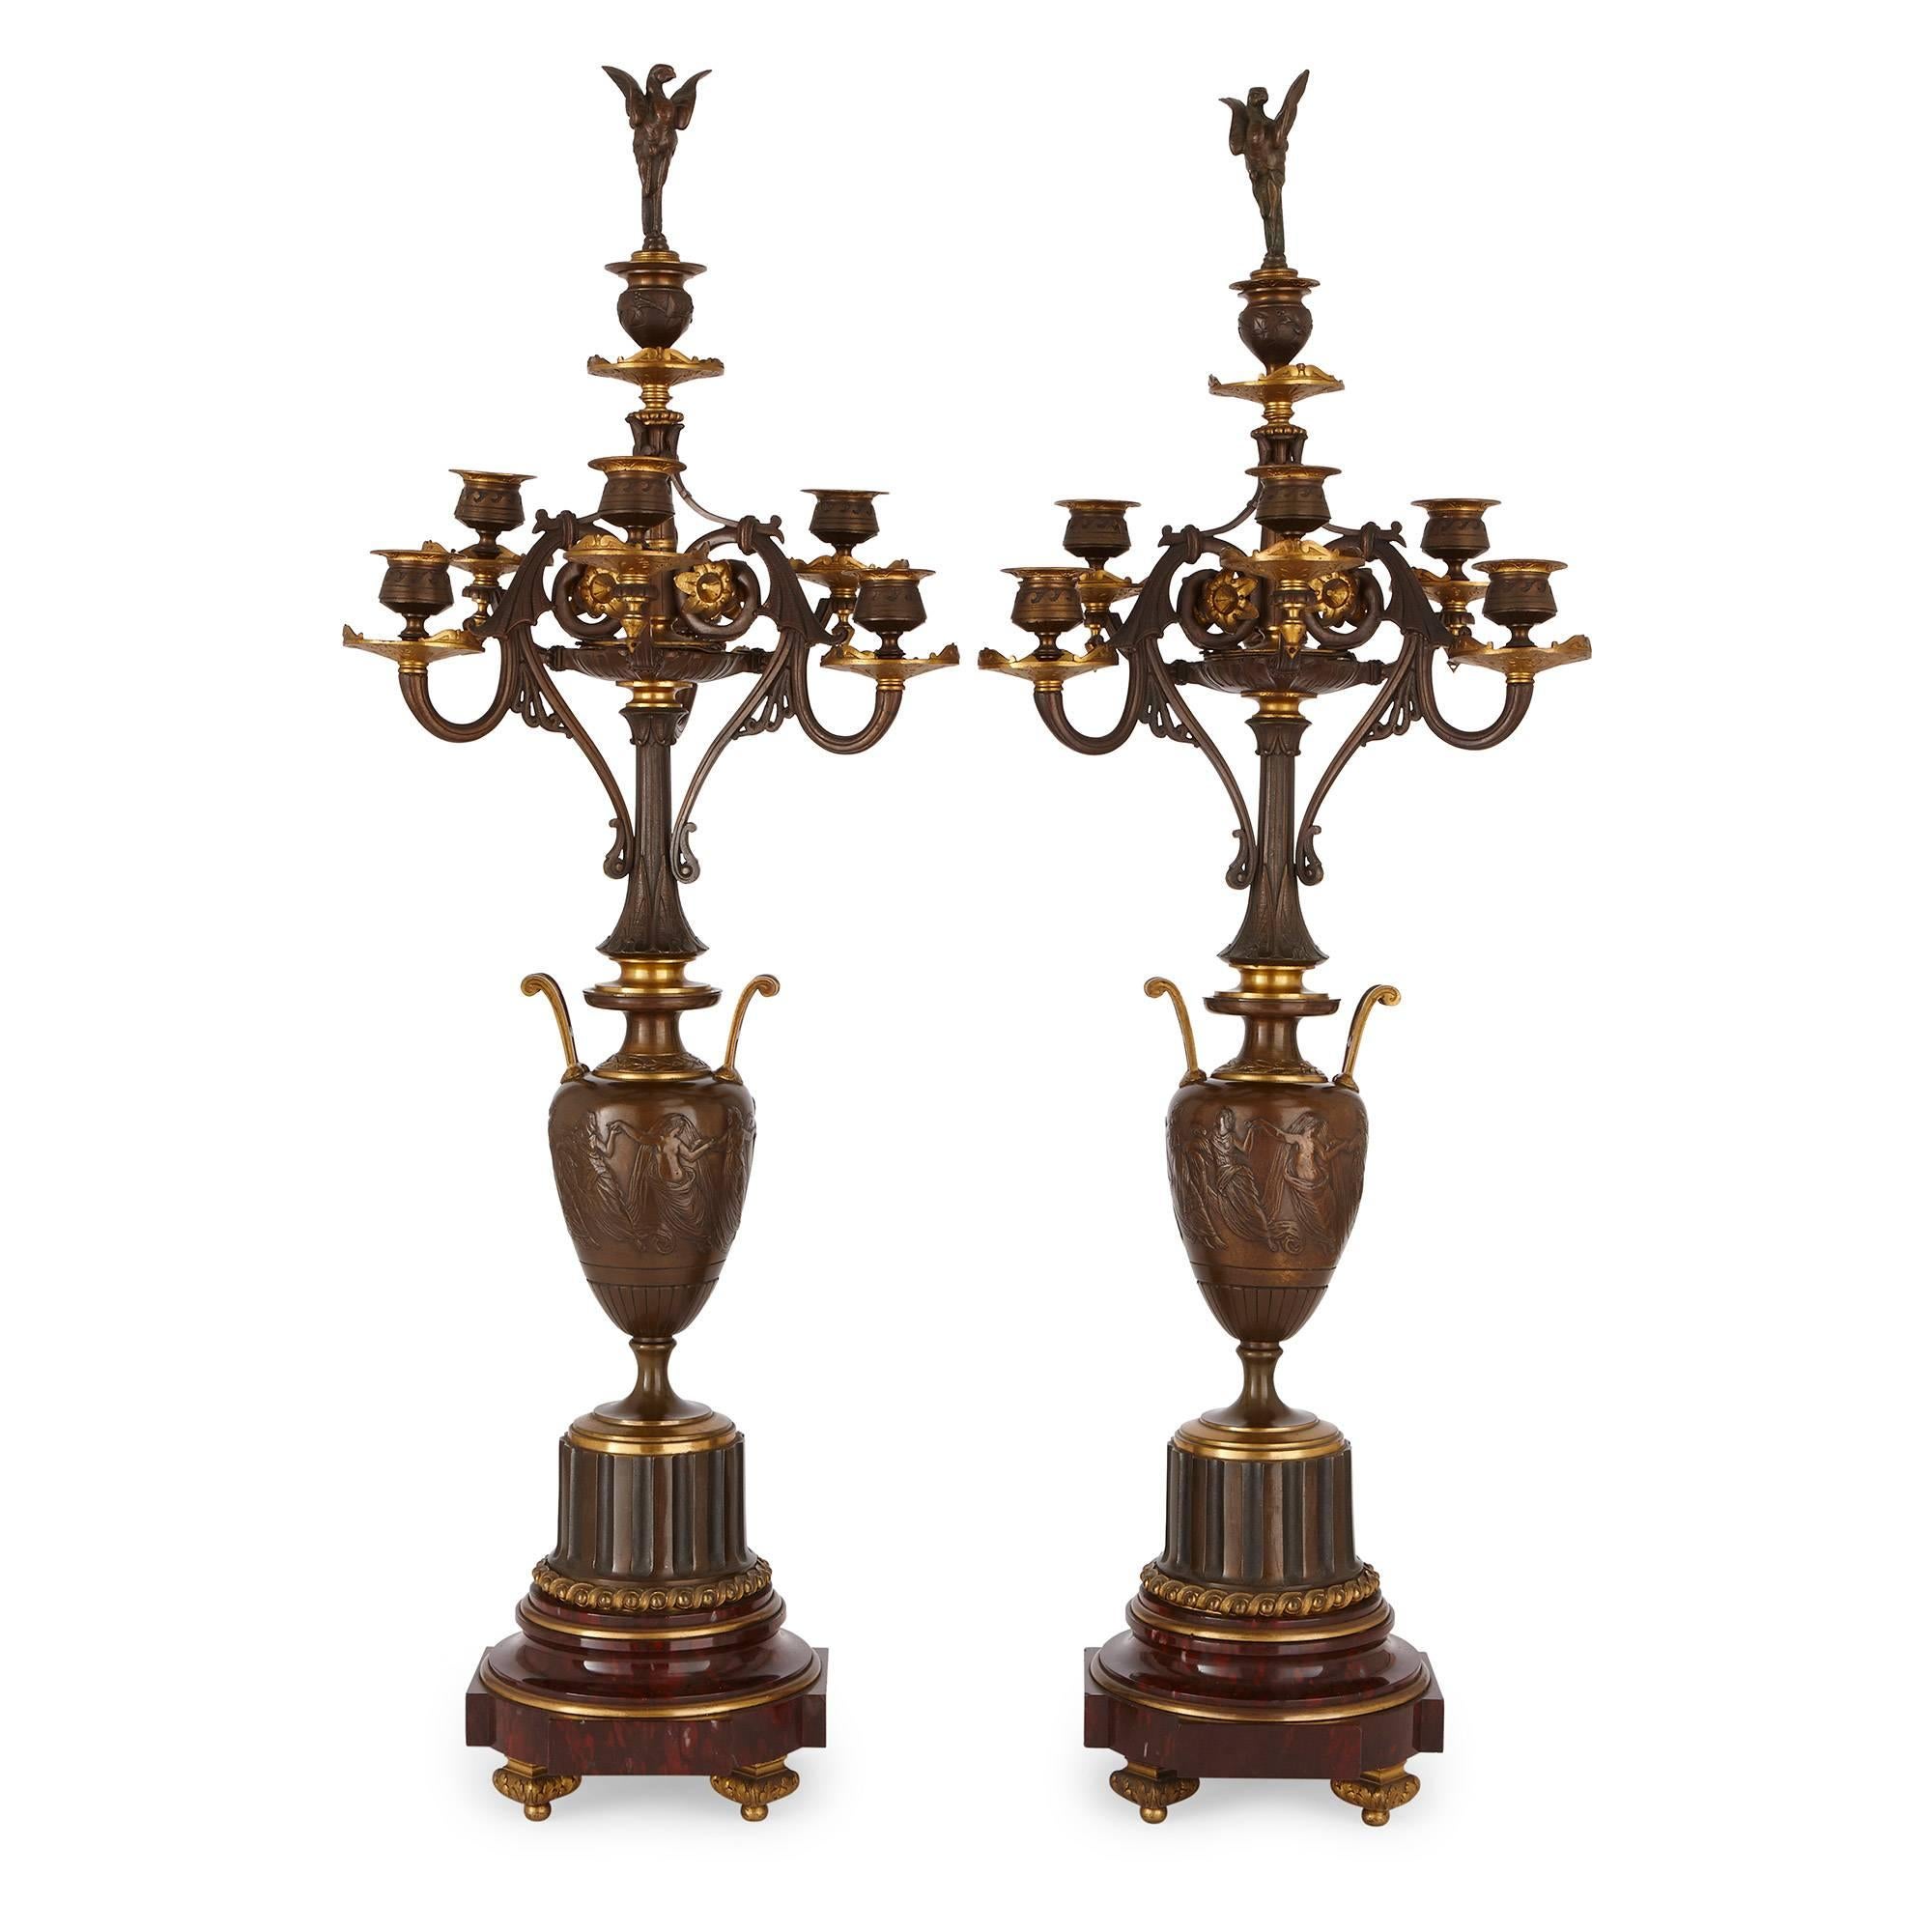 19th Century Lemerle-Charpentier & Cie Marble, Gilt and Patinated Bronze Clock Set For Sale